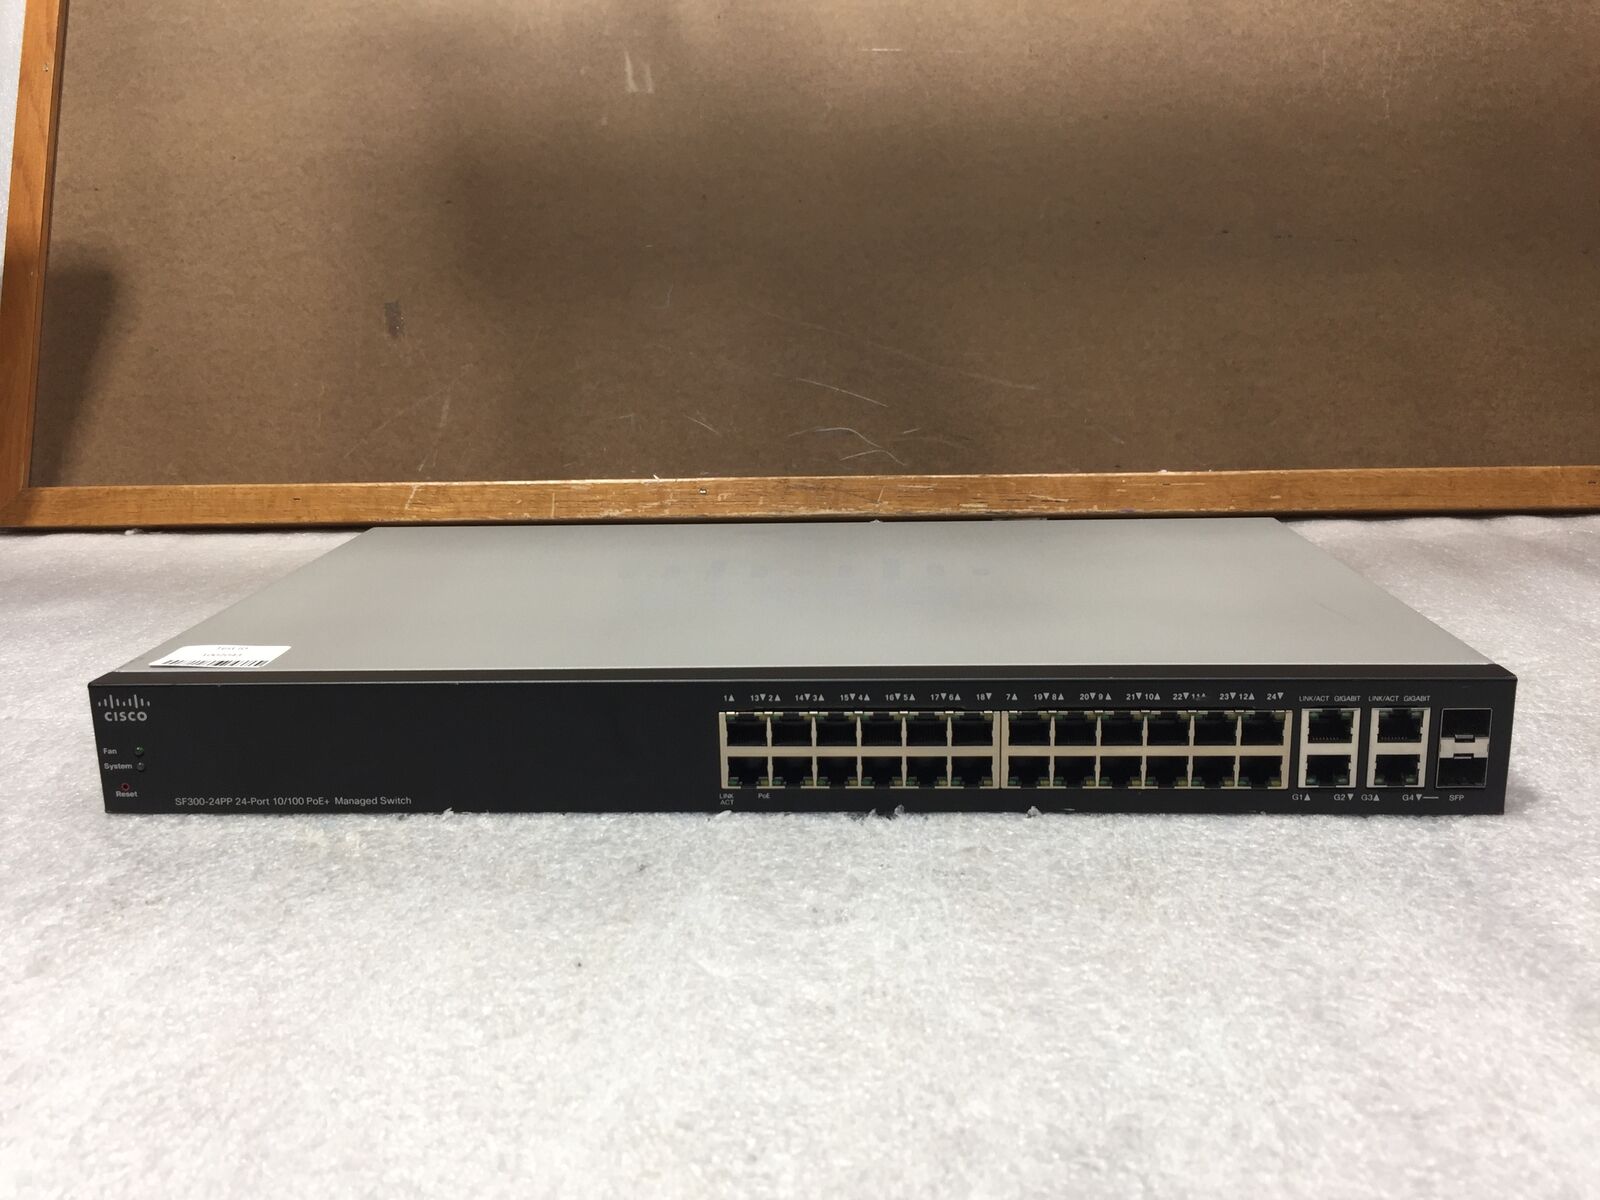 Cisco SF300-24PP 24 Port 10/100 POE+ Managed Switch POE Plus TESTED RESET